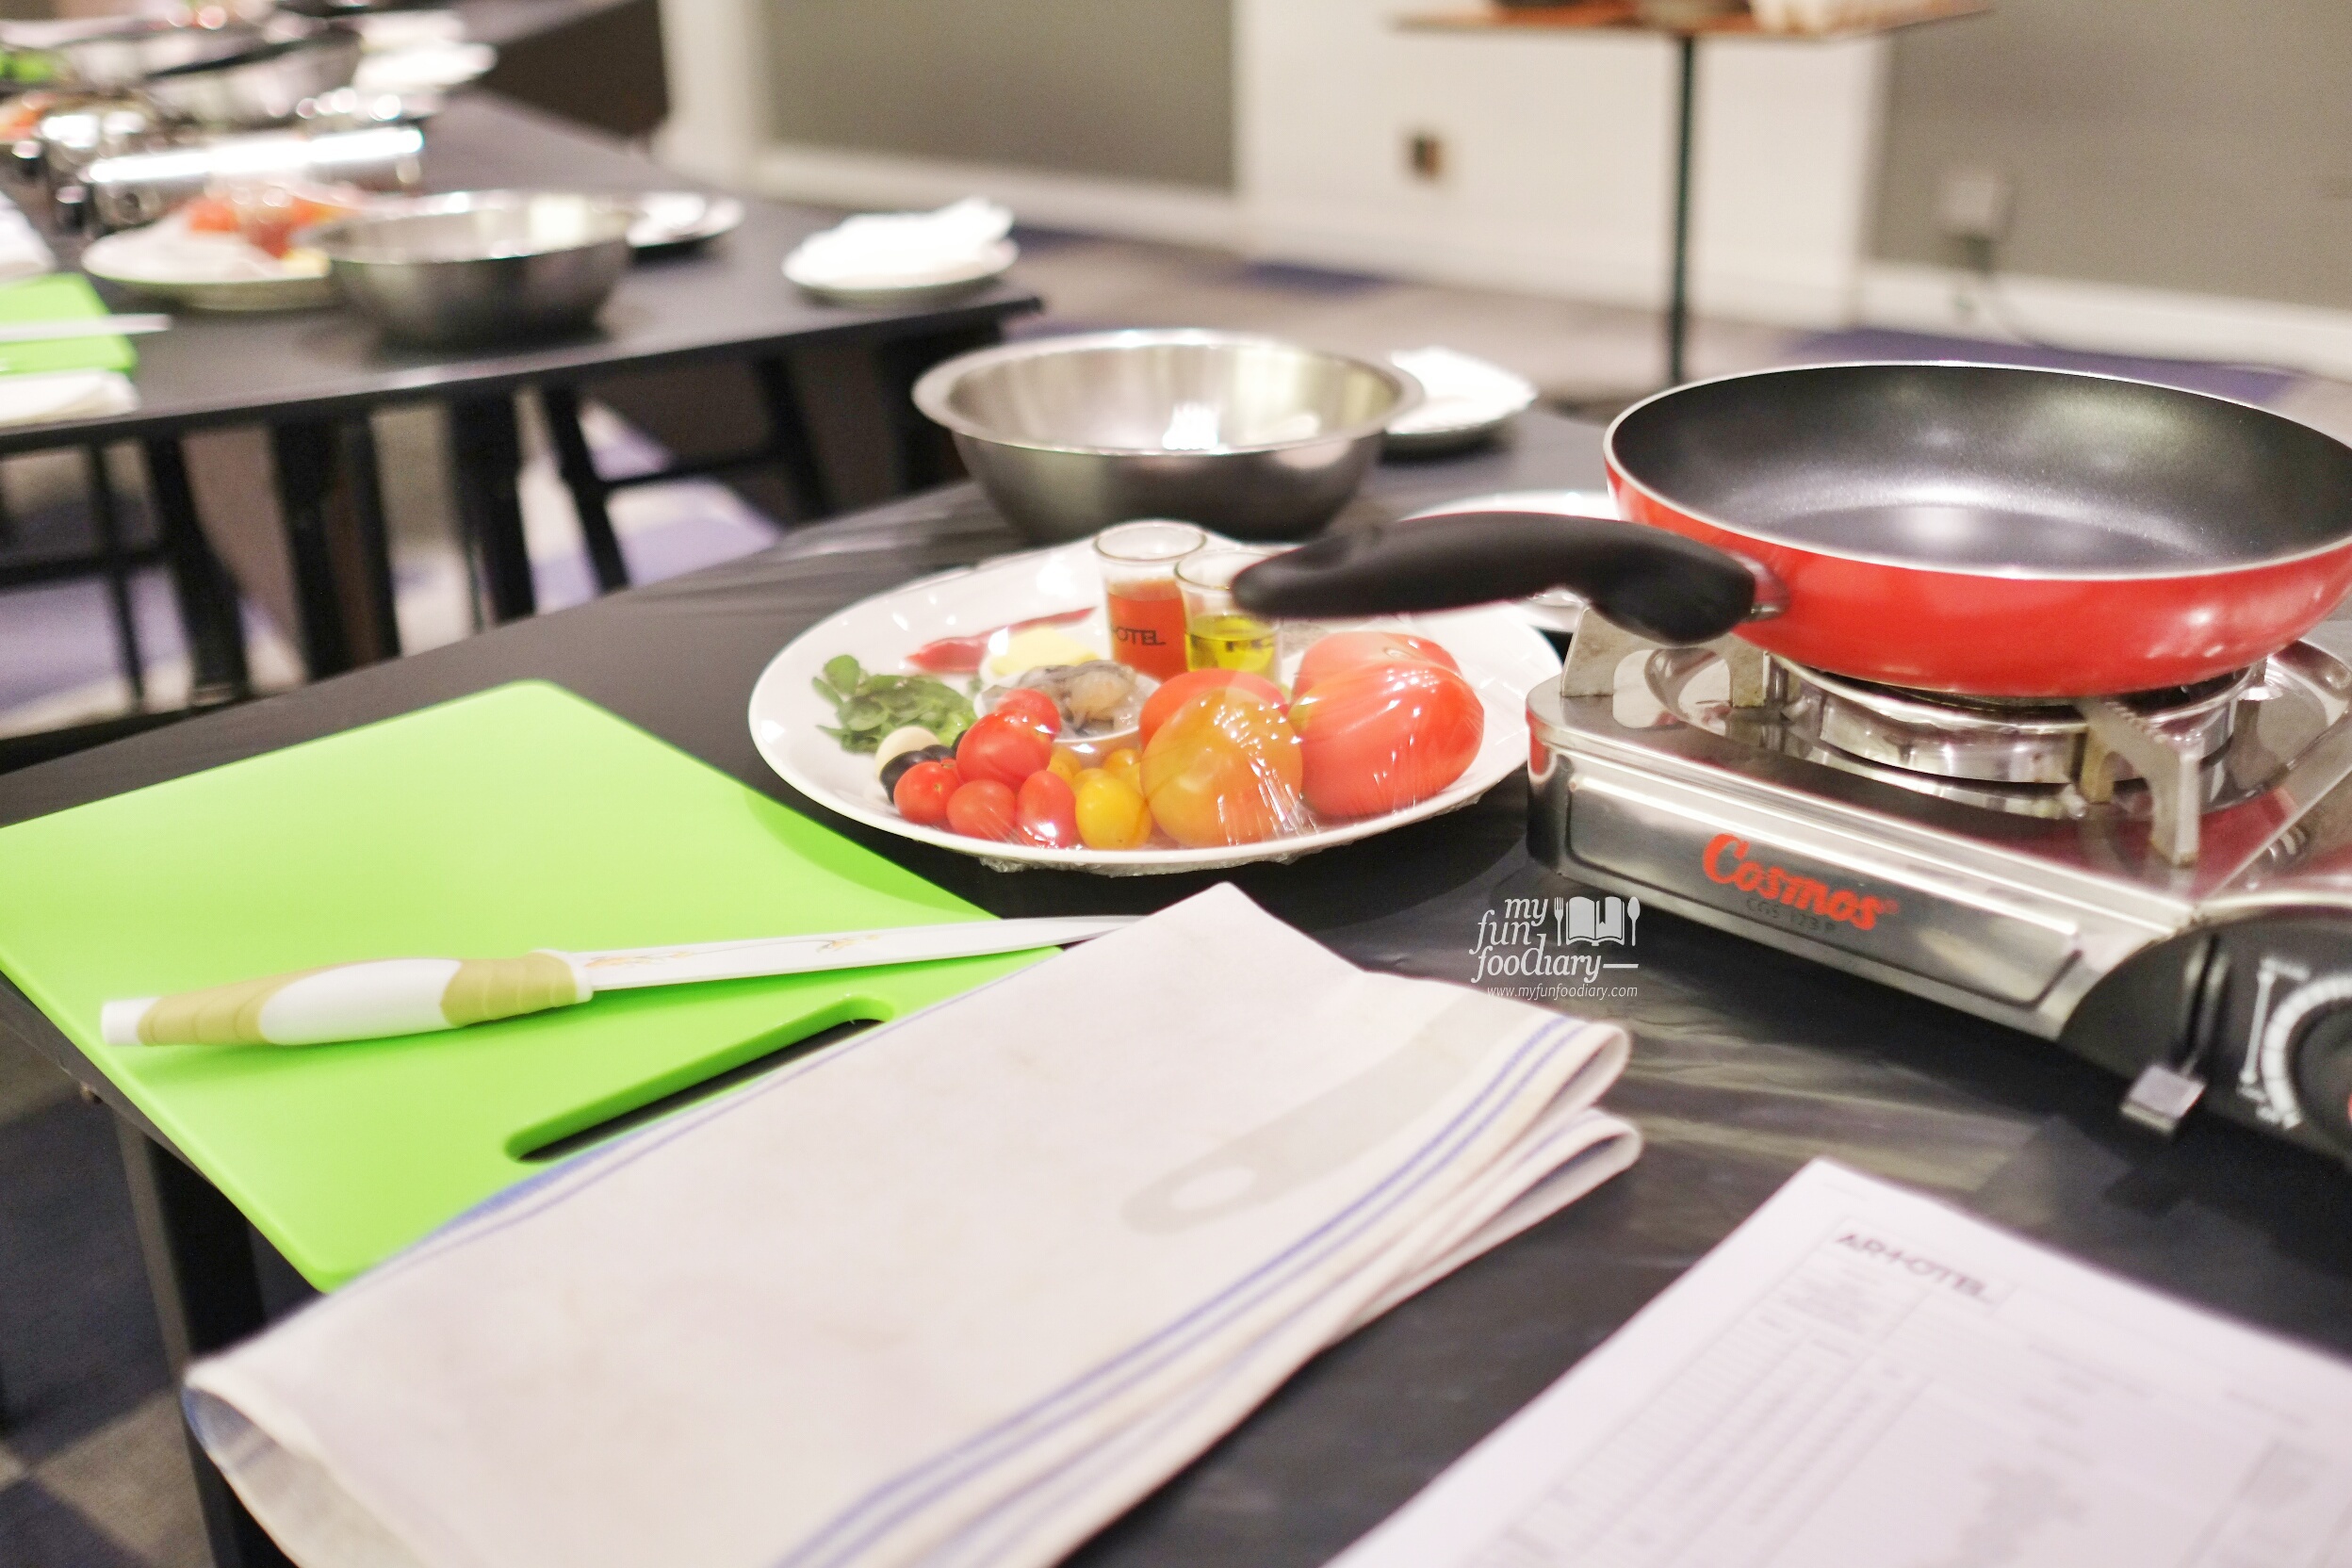 Preparation on the Table at our Cooking Class with Artotel Thamrin by Myfunfoodiary